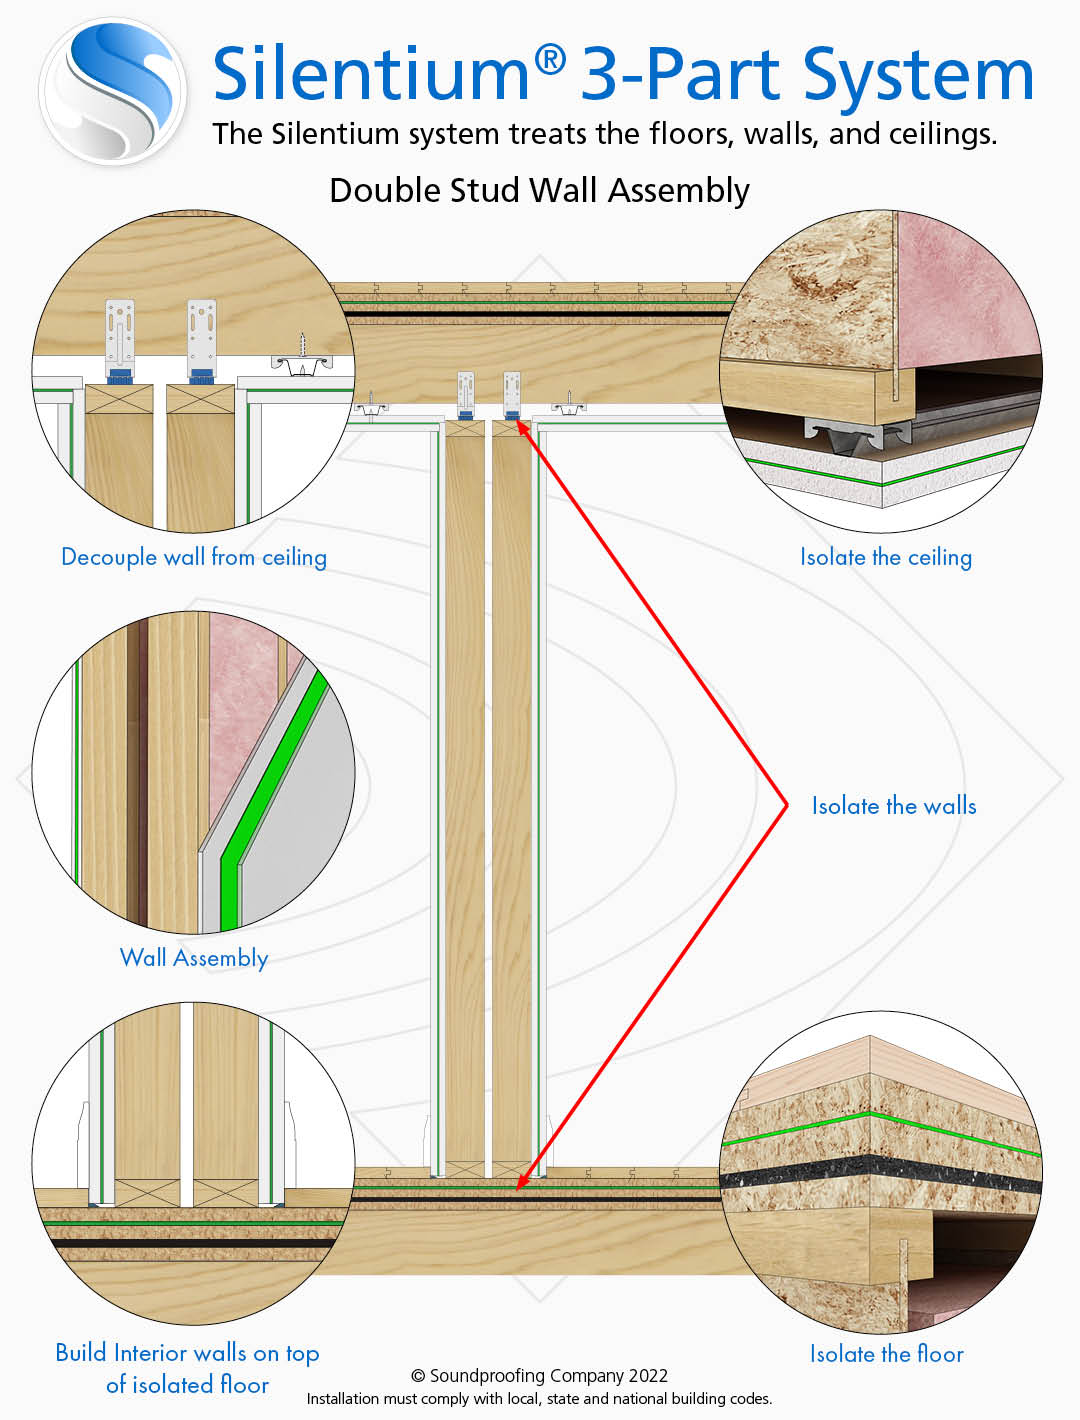 Double Stud Wall Assembly - Commercial Soundproofing Wall Installation